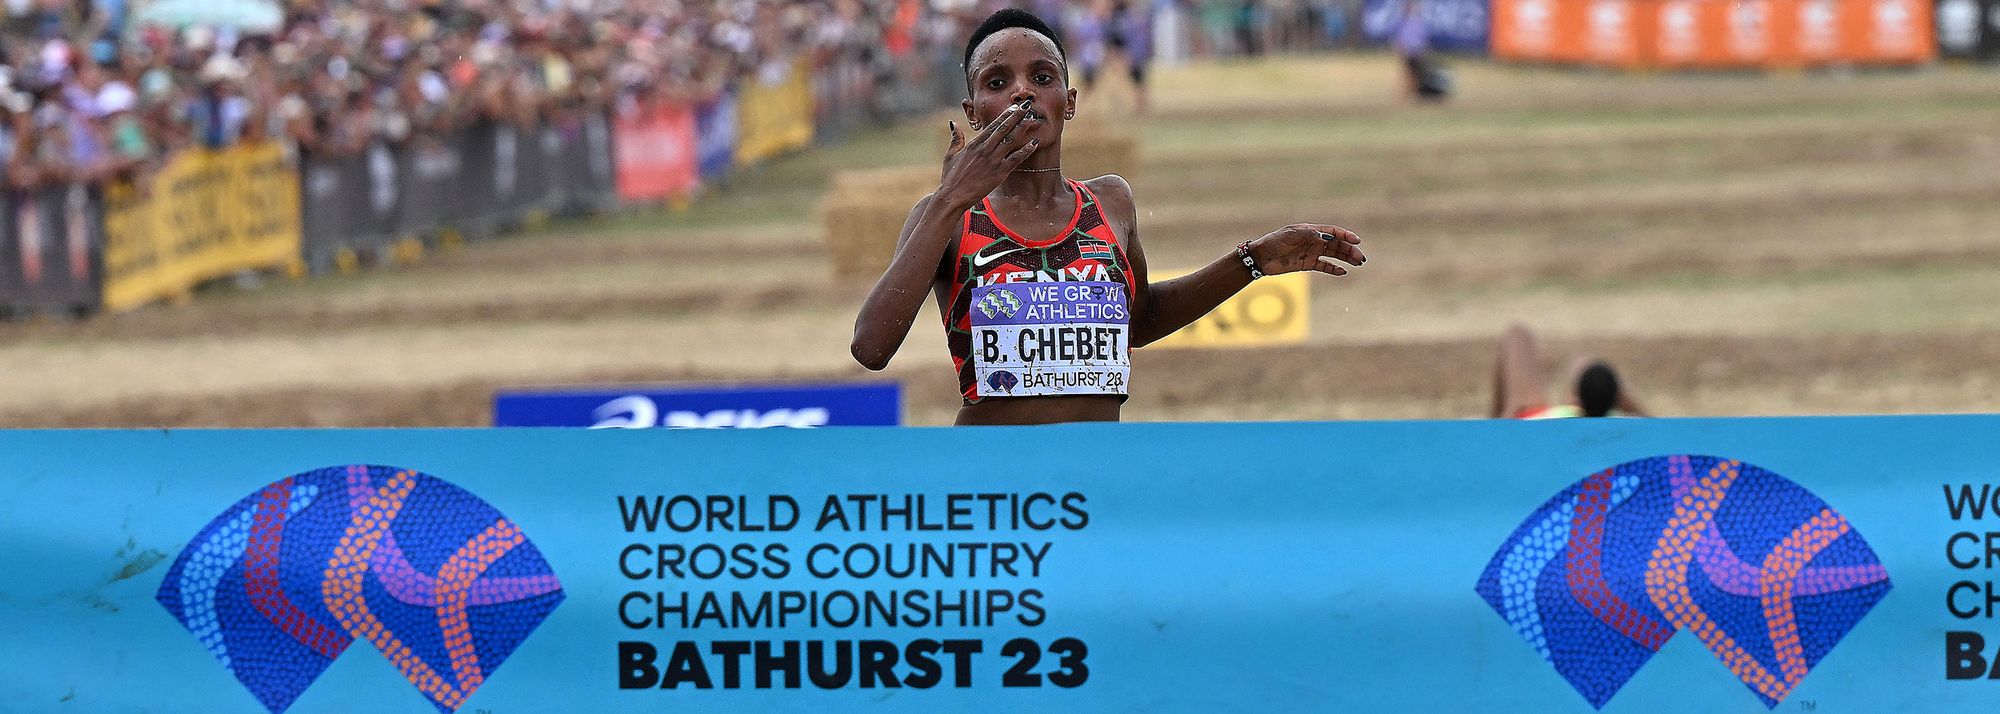 Kenya’s Beatrice Chebet passes pre-race favourite Letesenbet Gidey, who fell and was disqualified metres from the finish.